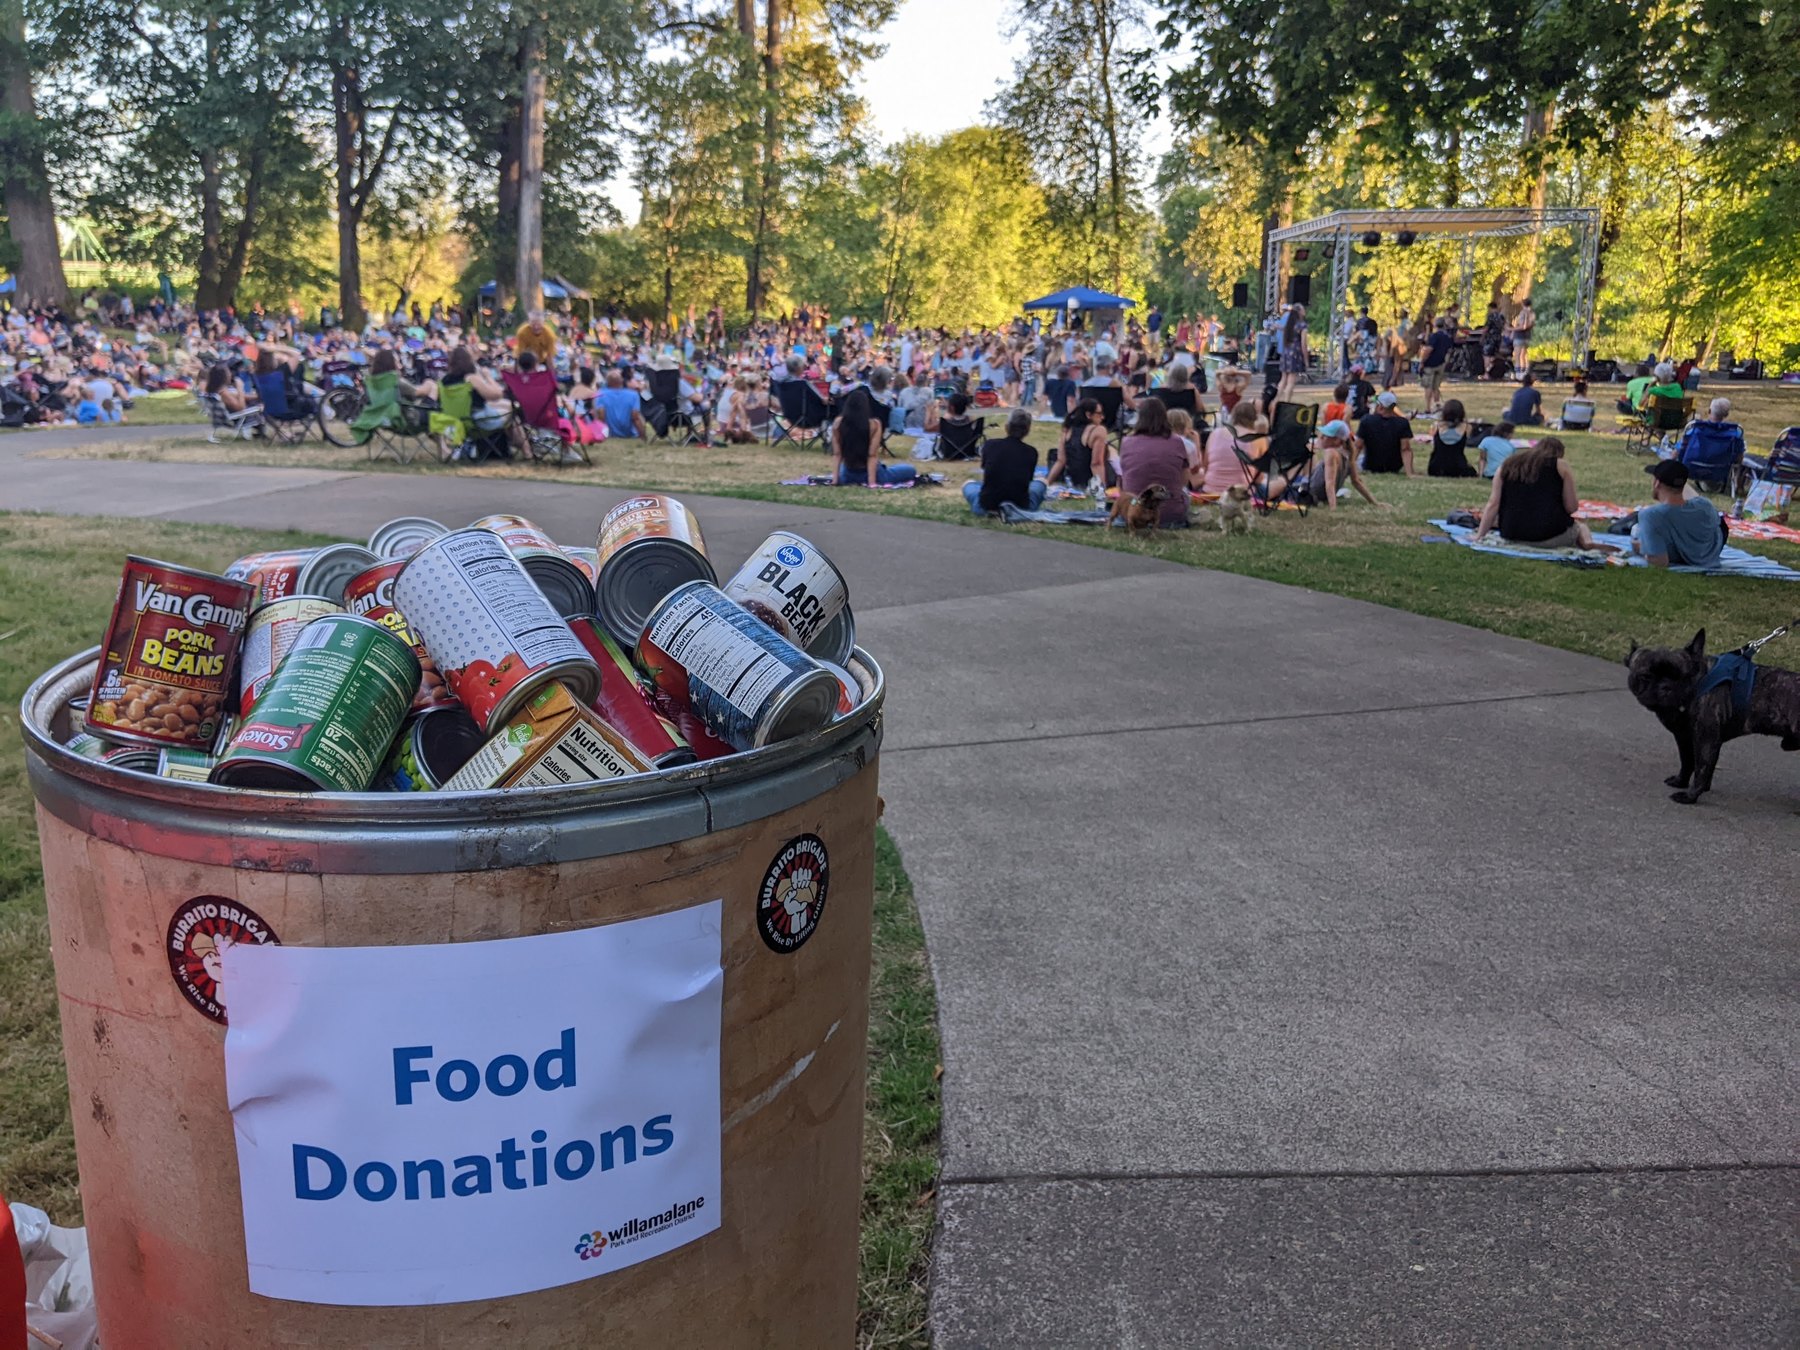 A food donation bin is full of canned food at an outdoor concert event